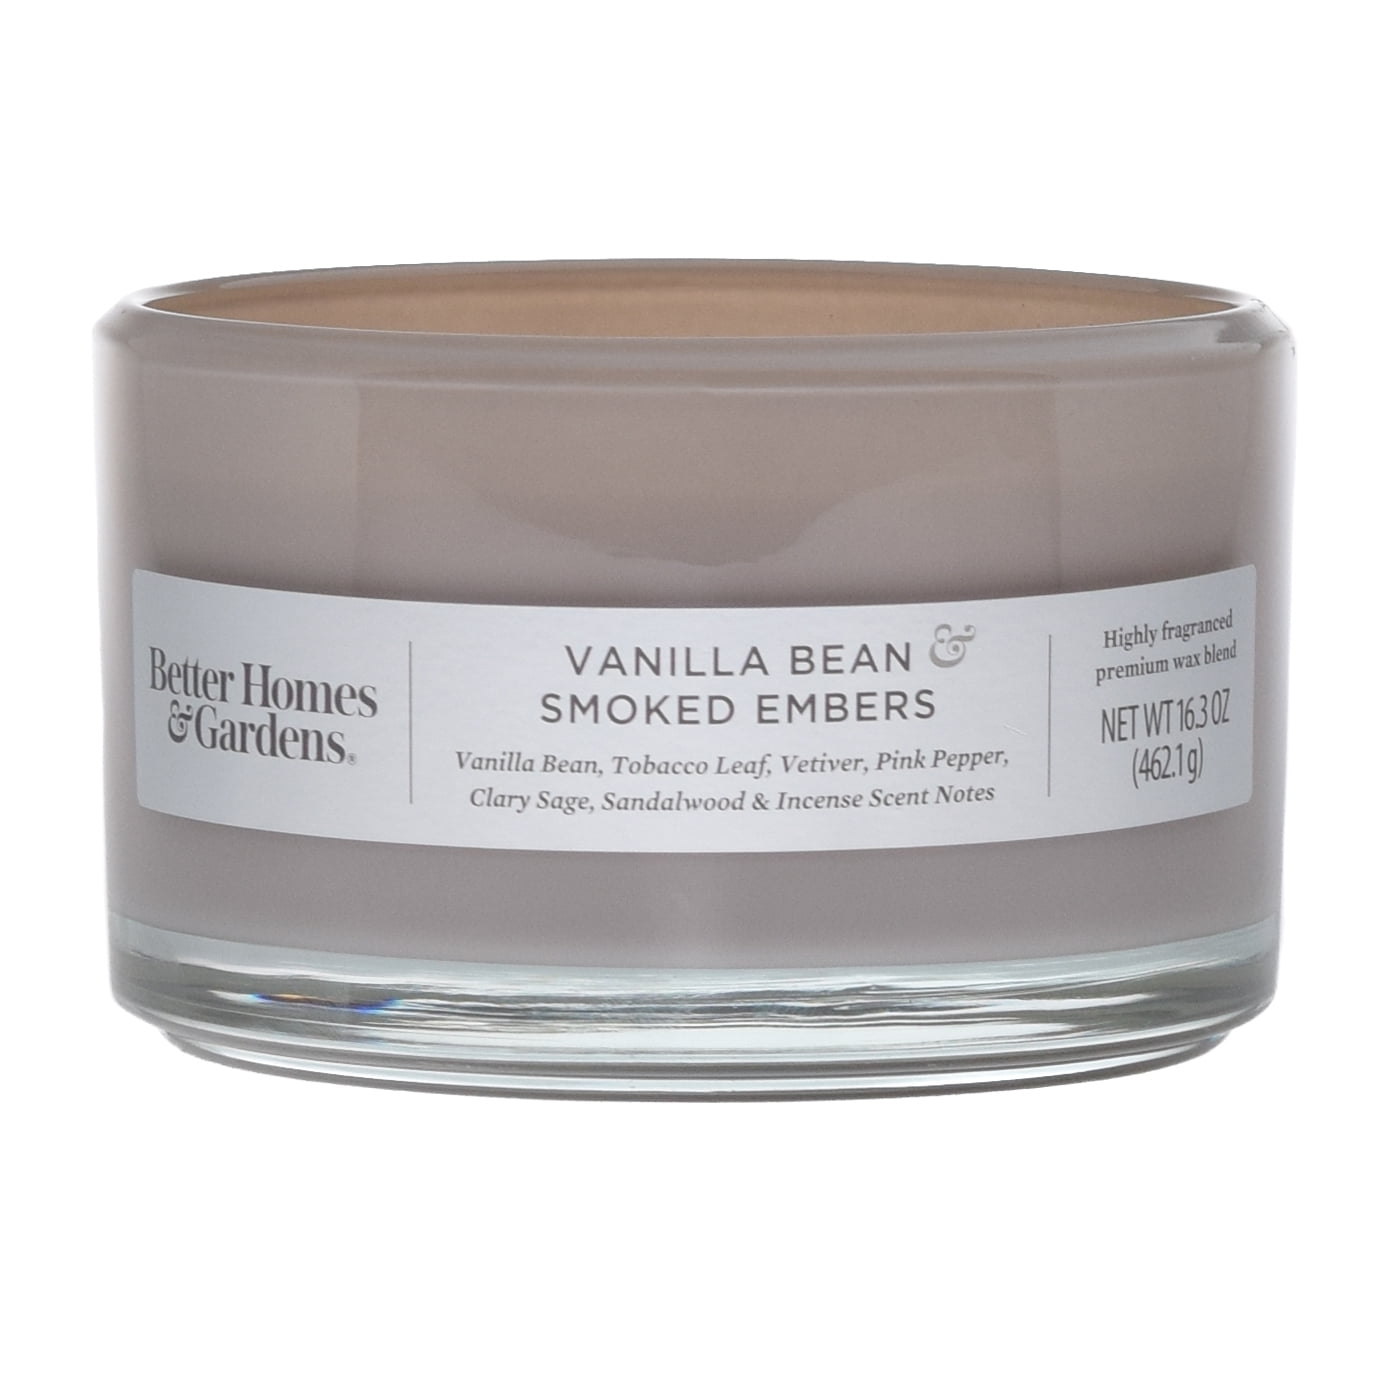 16-Oz 3-Wick Better Homes & Gardens Scented Dish Candle (Vanilla Bean & Smoked Embers) $4.40  + Free S&H w/ Walmart+ or $35+